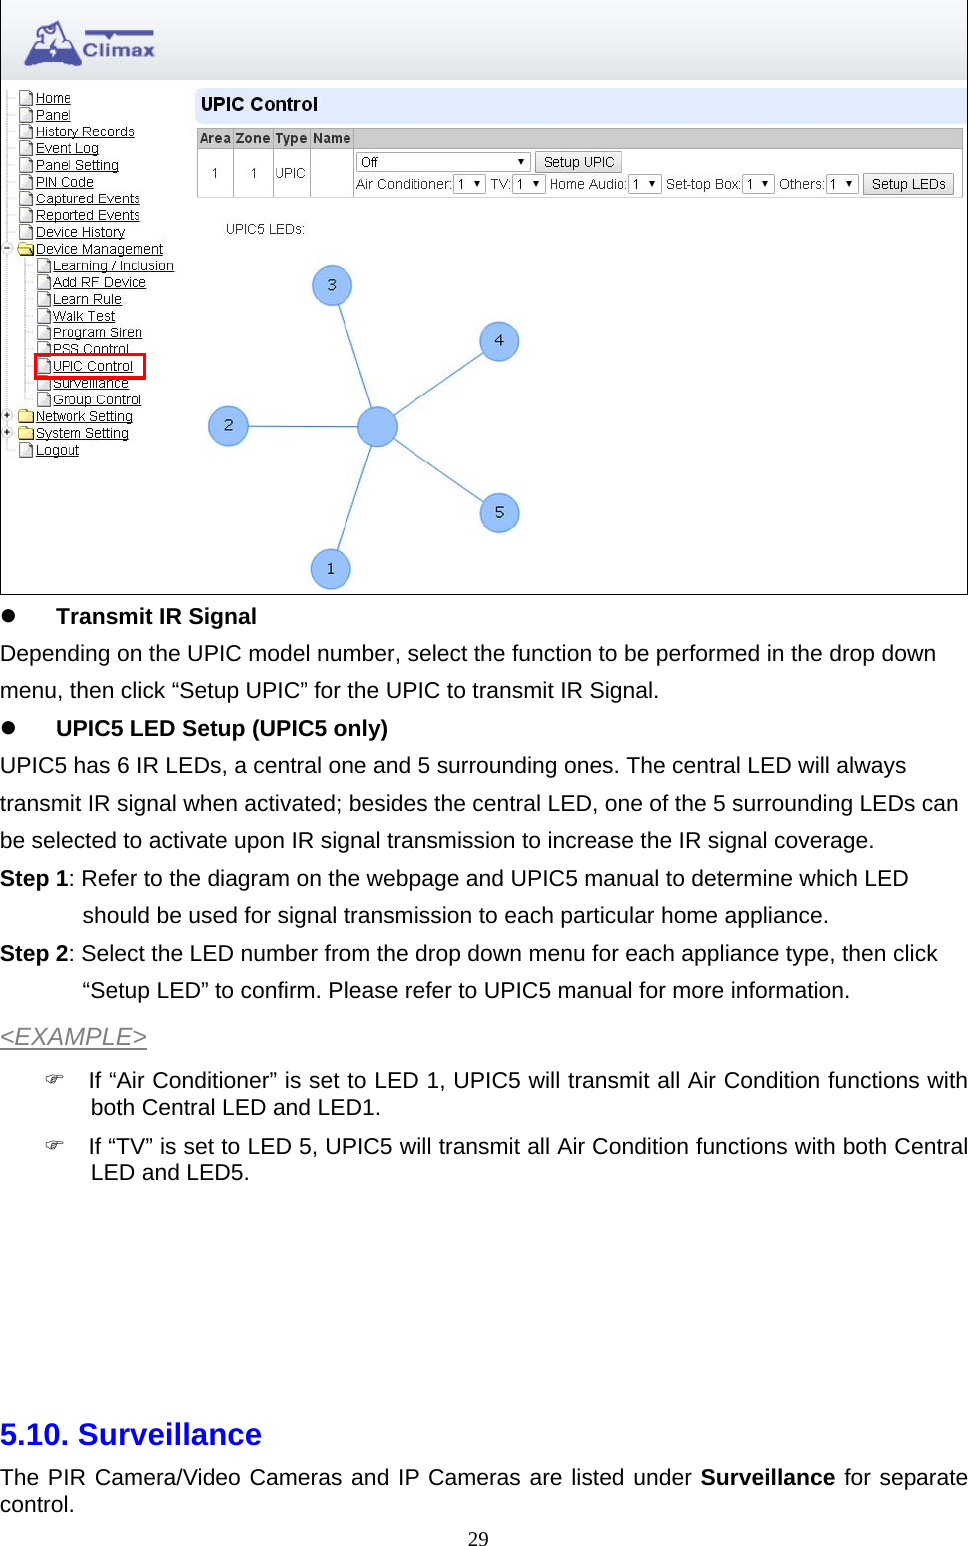  29  Transmit IR Signal Depending on the UPIC model number, select the function to be performed in the drop down menu, then click “Setup UPIC” for the UPIC to transmit IR Signal.  UPIC5 LED Setup (UPIC5 only) UPIC5 has 6 IR LEDs, a central one and 5 surrounding ones. The central LED will always transmit IR signal when activated; besides the central LED, one of the 5 surrounding LEDs can be selected to activate upon IR signal transmission to increase the IR signal coverage. Step 1: Refer to the diagram on the webpage and UPIC5 manual to determine which LED should be used for signal transmission to each particular home appliance. Step 2: Select the LED number from the drop down menu for each appliance type, then click “Setup LED” to confirm. Please refer to UPIC5 manual for more information. &lt;EXAMPLE&gt;   If “Air Conditioner” is set to LED 1, UPIC5 will transmit all Air Condition functions with both Central LED and LED1.   If “TV” is set to LED 5, UPIC5 will transmit all Air Condition functions with both Central LED and LED5.       5.10. Surveillance The PIR Camera/Video Cameras and IP Cameras are listed under Surveillance for separate control. 